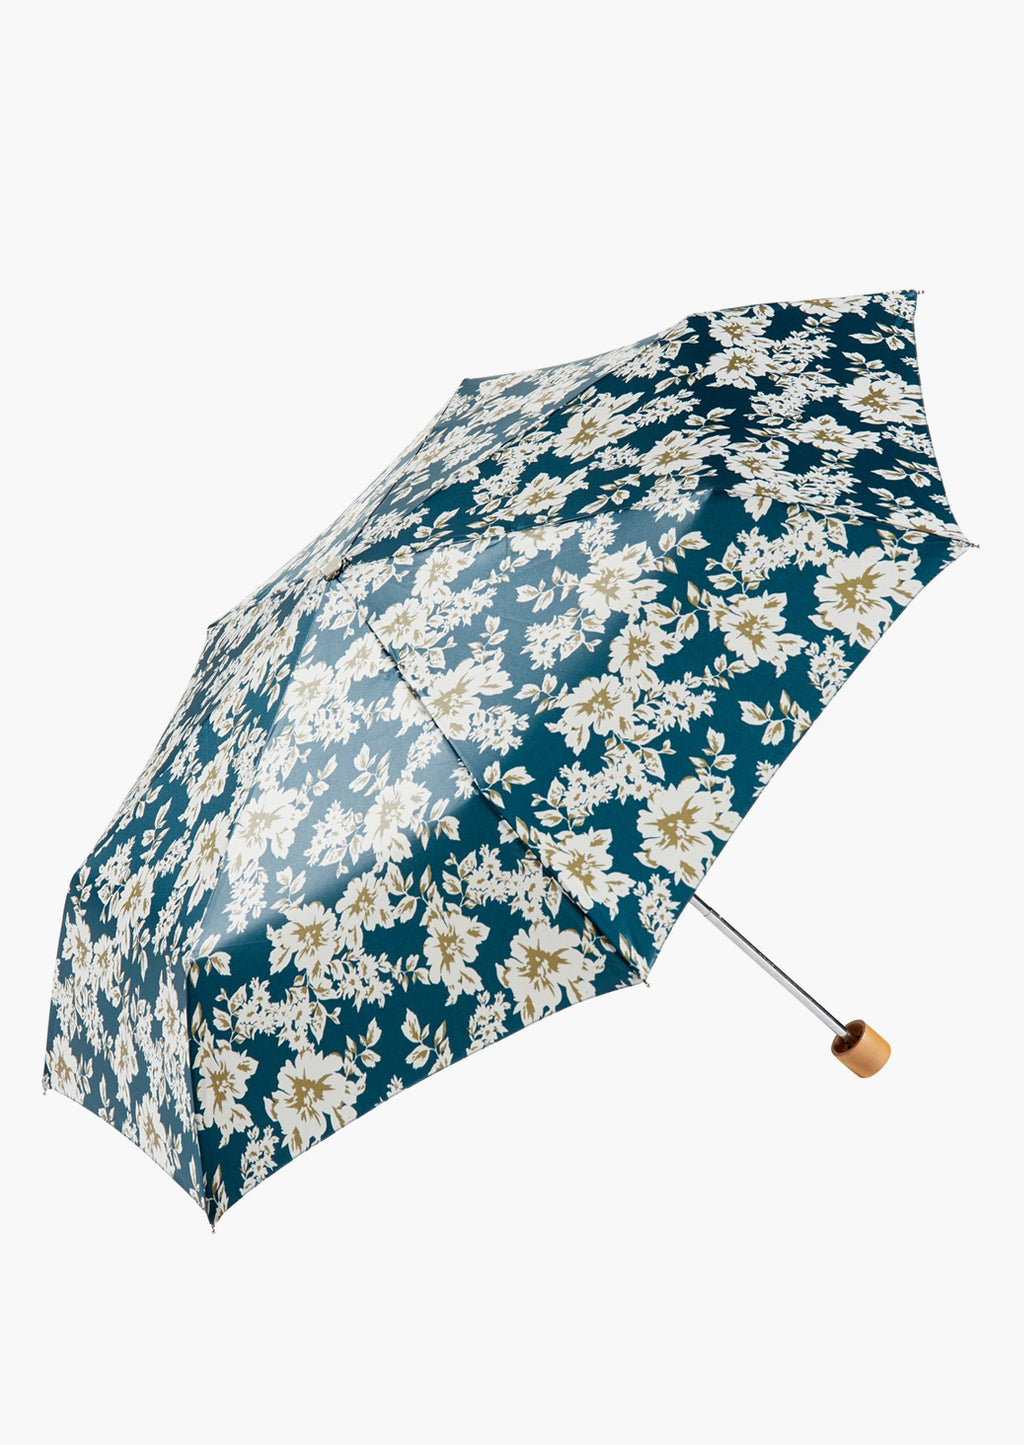 Teal / Olive Green: A teal and olive green floral print umbrella.